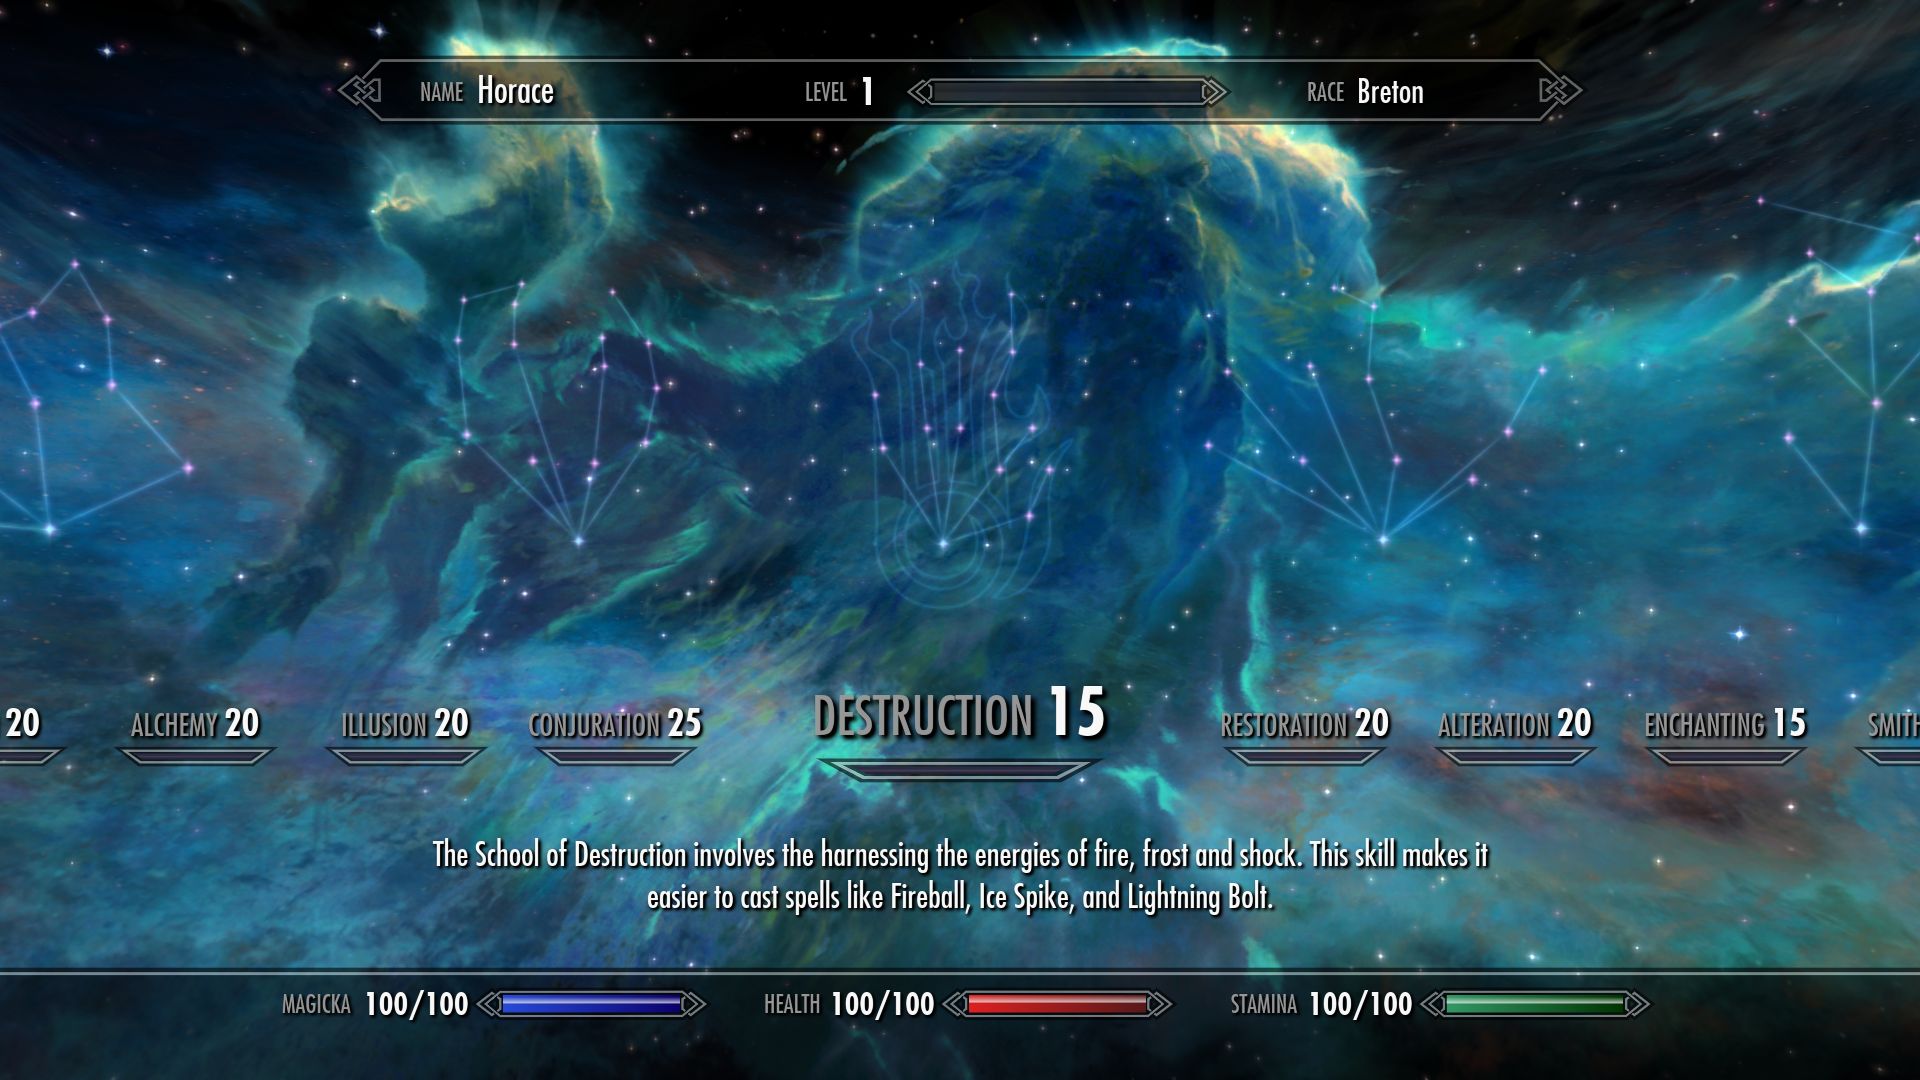 The skill screen in The Elder Scrolls V: Skyrim, where different abilities are represented as constellations